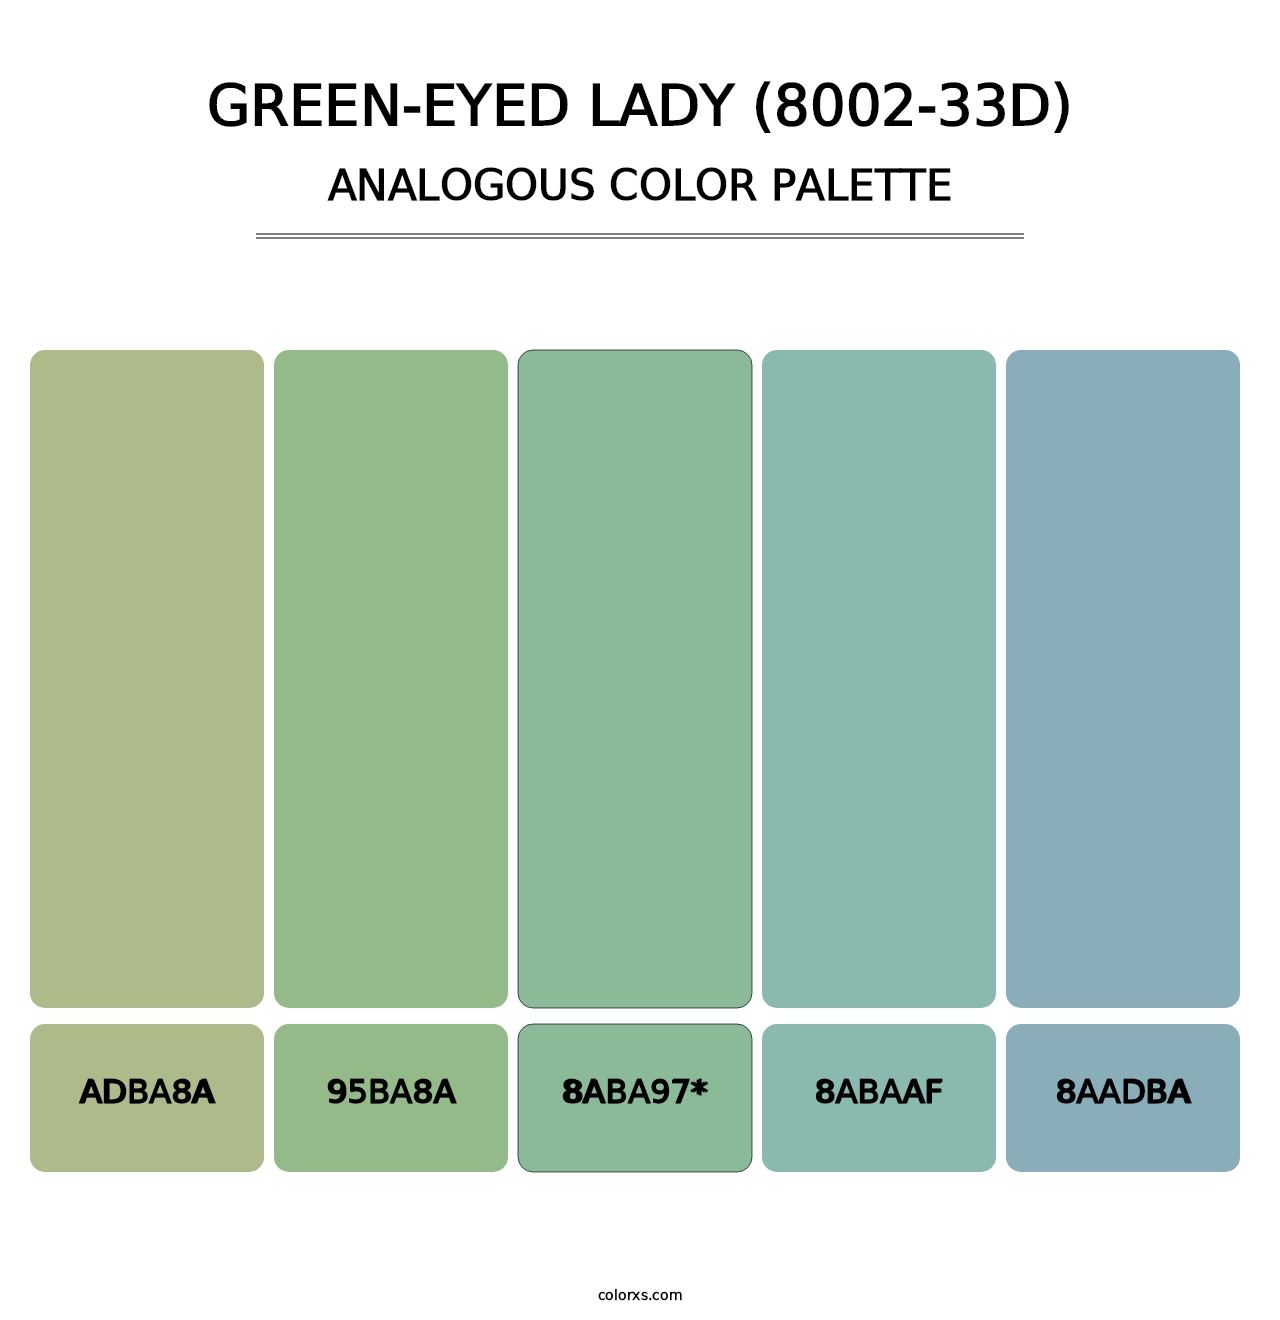 Green-Eyed Lady (8002-33D) - Analogous Color Palette